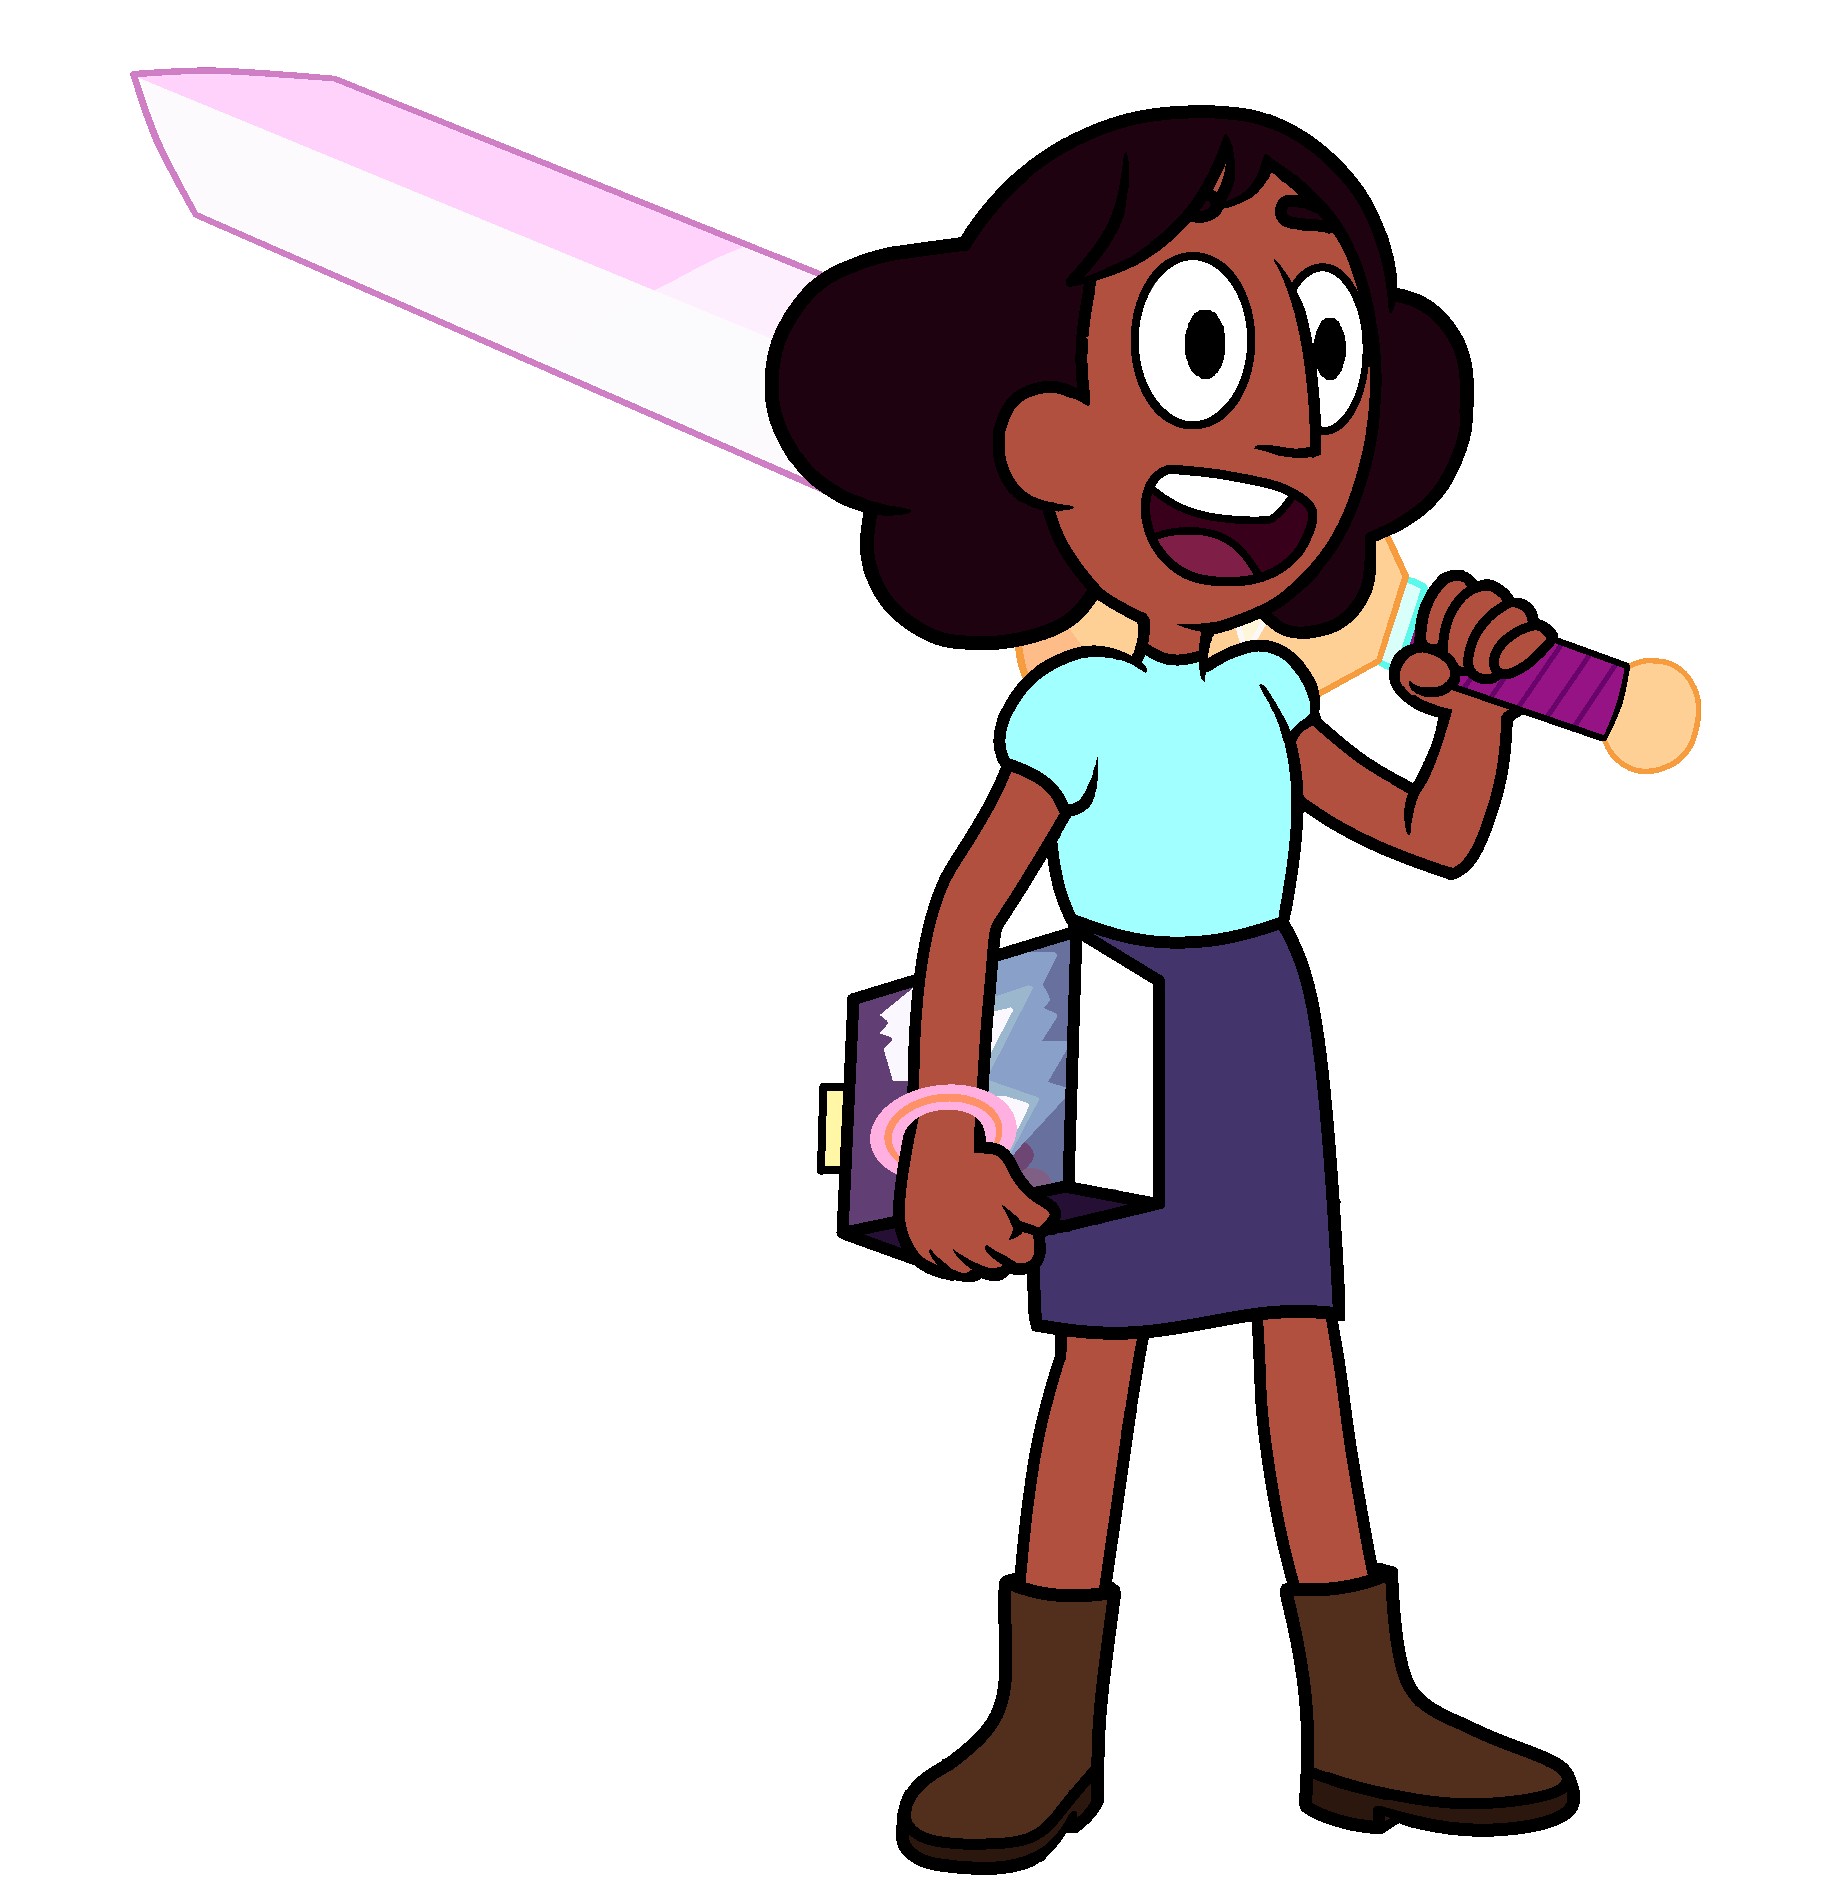 We have found a great Steven Universe character Connie Maheswaran holding s...